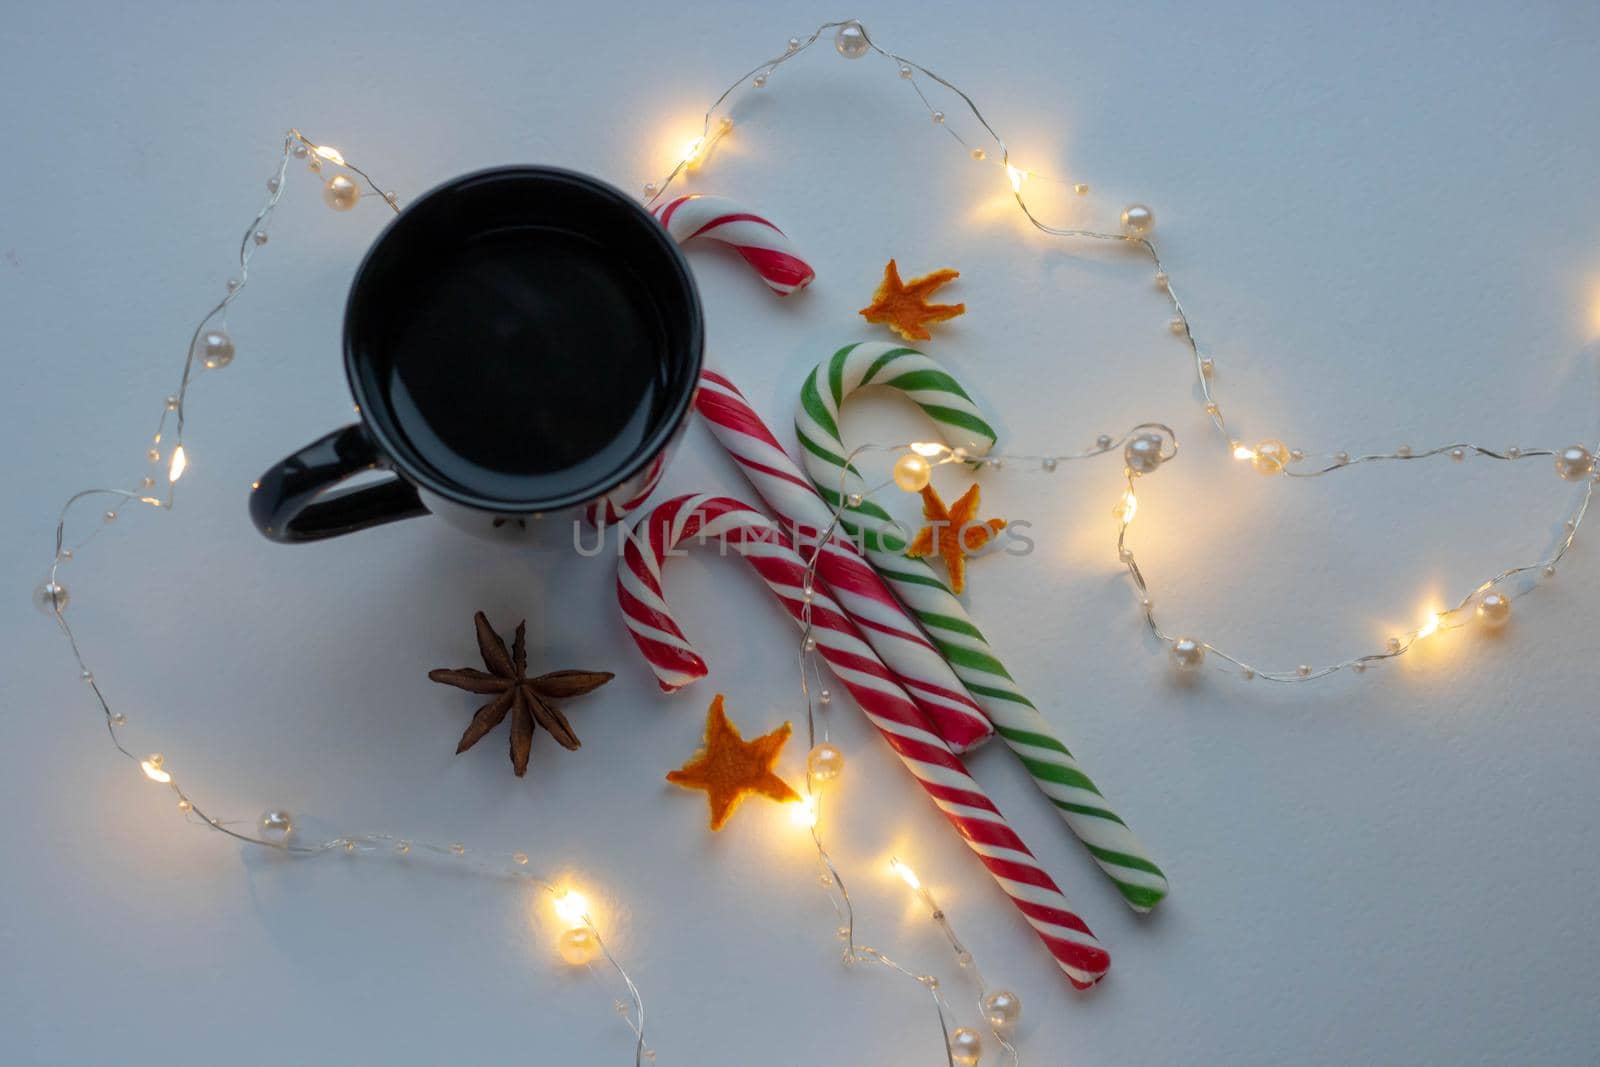 New year's concept of Christmas and winter. A black Cup of hot coffee, a candy cane, and a garland on a white background. The view from the top. Holiday Breakfast. by lapushka62